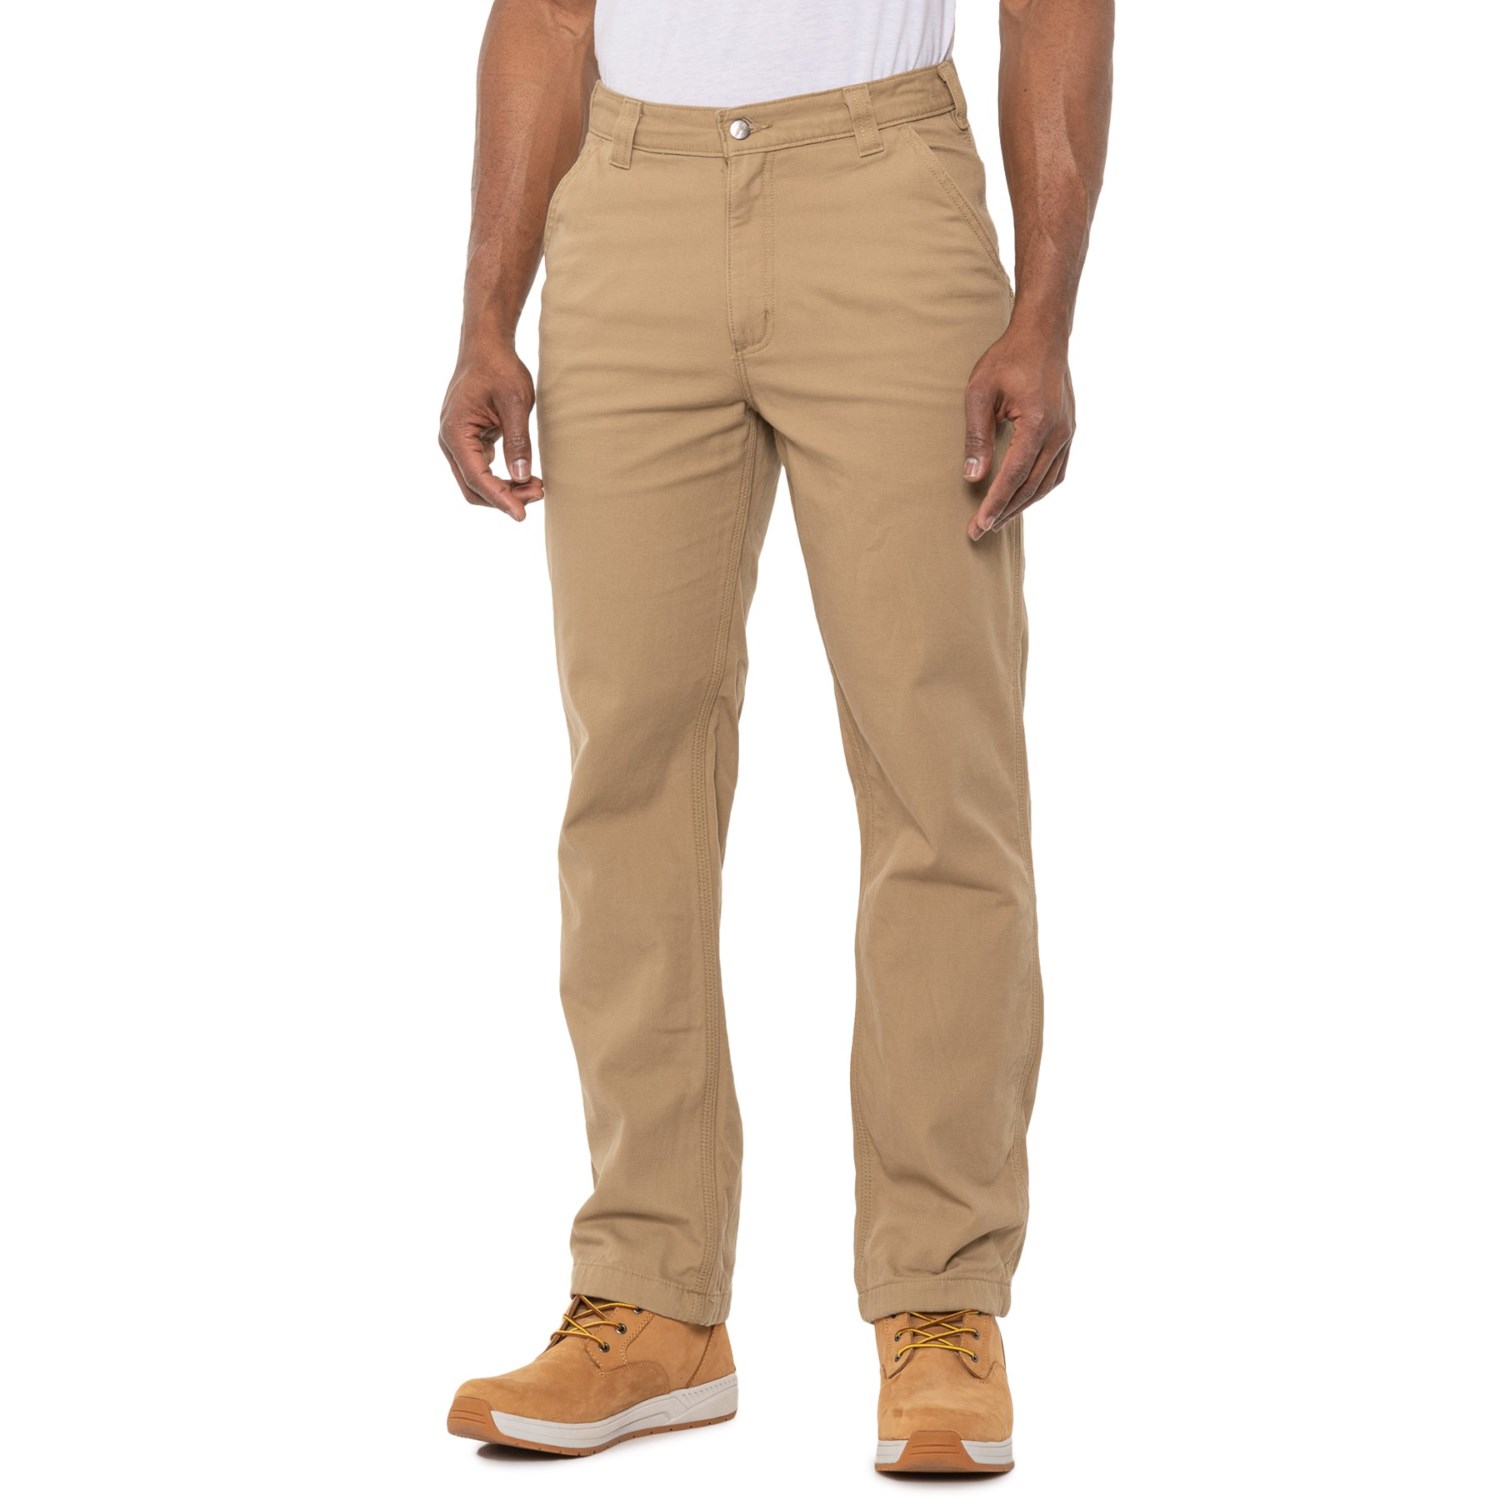 Carhartt 103342 RUGGED FLEX CANVAS KNIT LINED PANT - FOR MEN FACTORY SECONDS